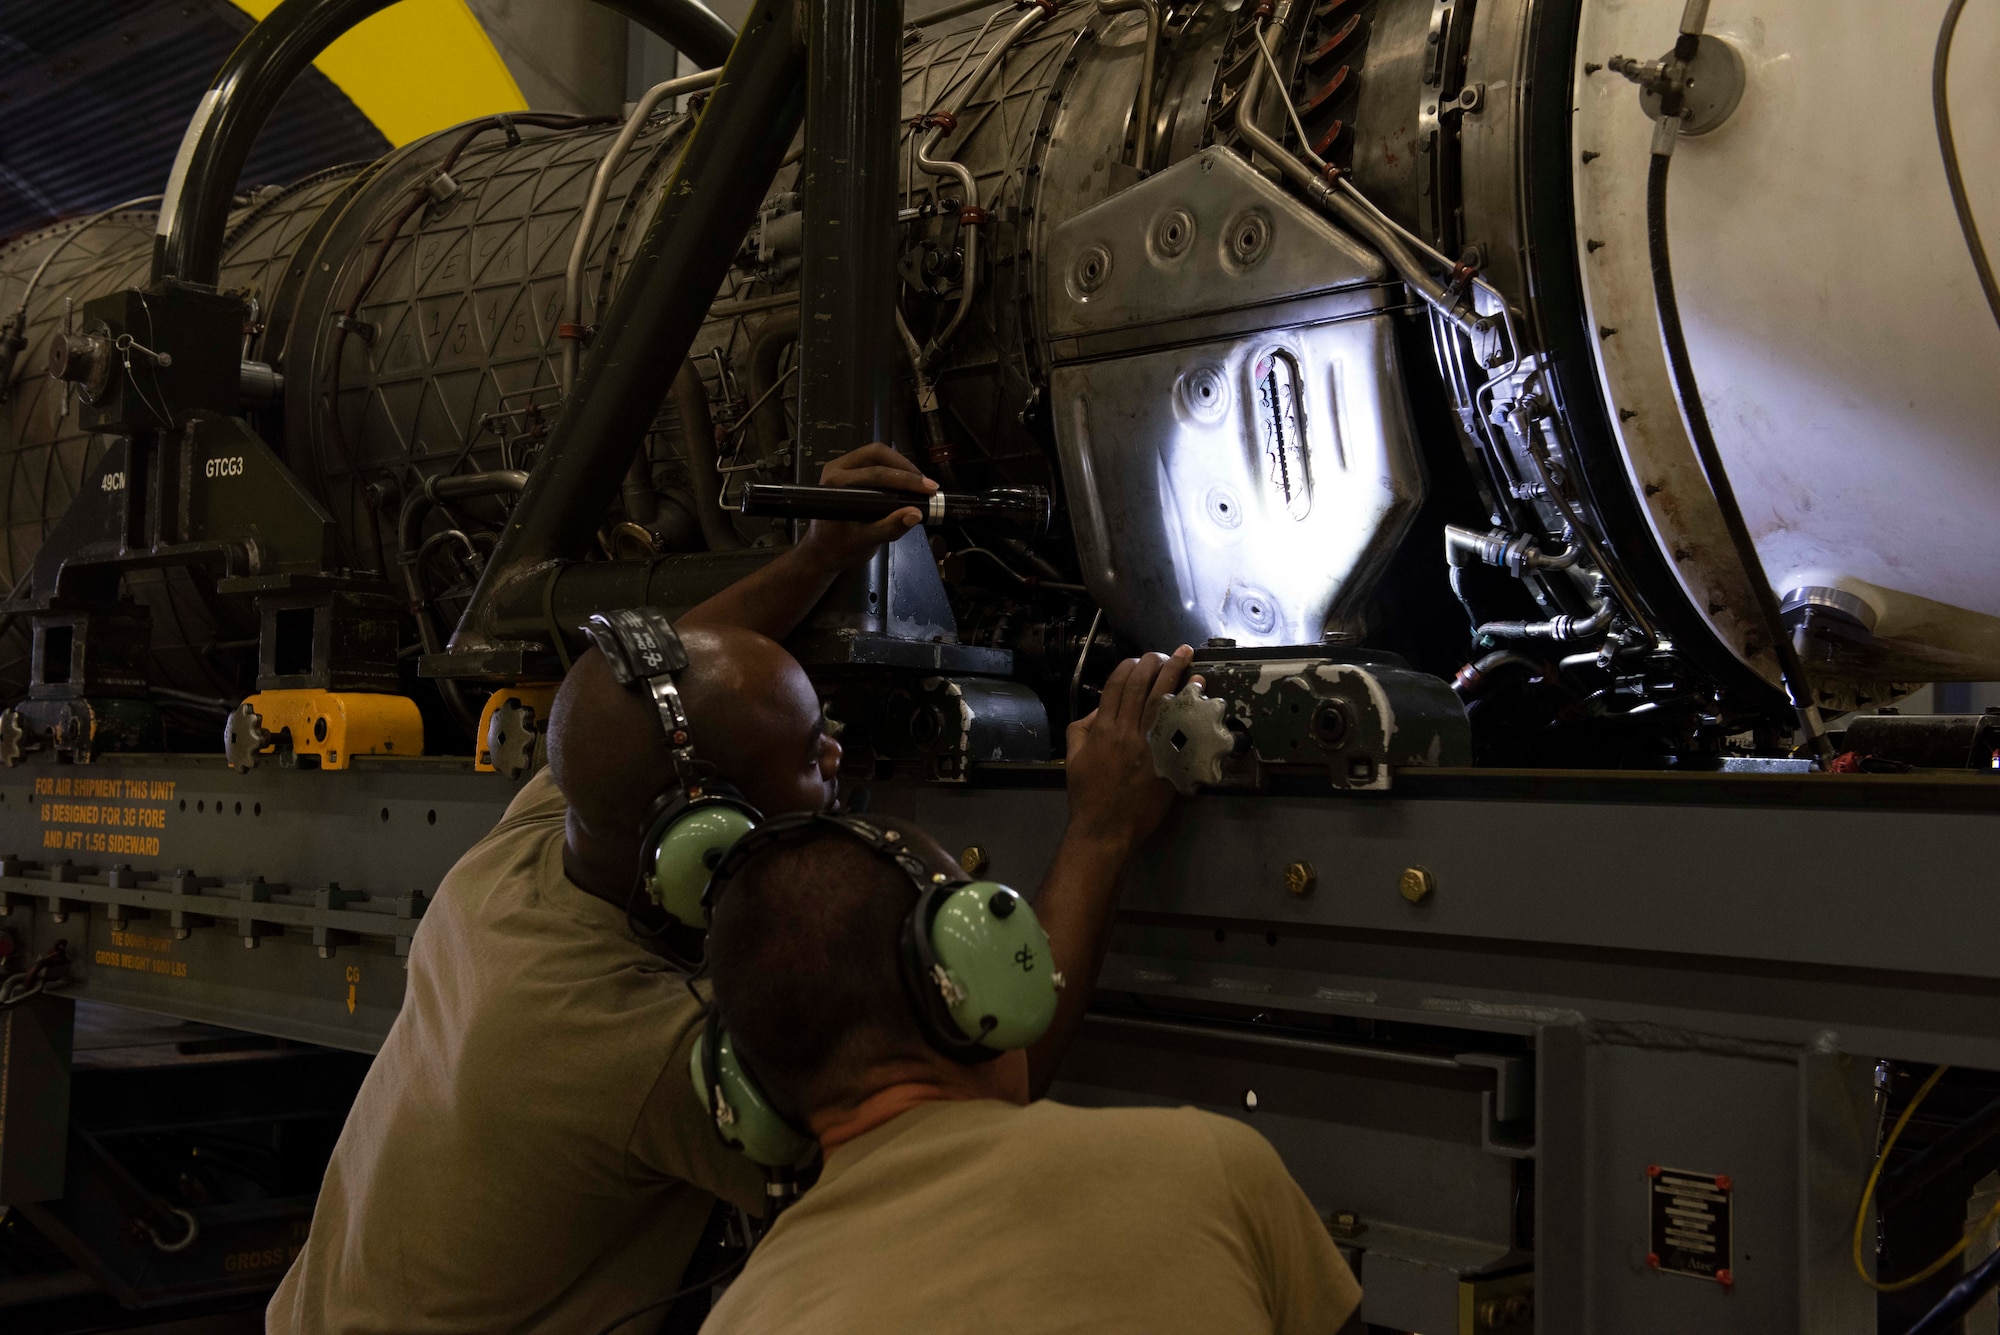 U.S. Air Force Staff Sgt. Samuel Berry, 49th Component Maintenance Squadron test cell craftsman, and Senior Airman Alex Turnage, 49th Component Maintenance Squadron aerospace propulsion journeyman, inspect the oil on a Pratt & Whitney F100 turbofan engine at Holloman Air Force Base, New Mexico, Sept. 6, 2022. The 49th CMS is composed of more than 190 personnel charged with providing top-tier engines that keep Holloman's F-16 Viper pilots in the air. (U.S. Air photo by Airman 1st Class Isaiah Pedrazzini)